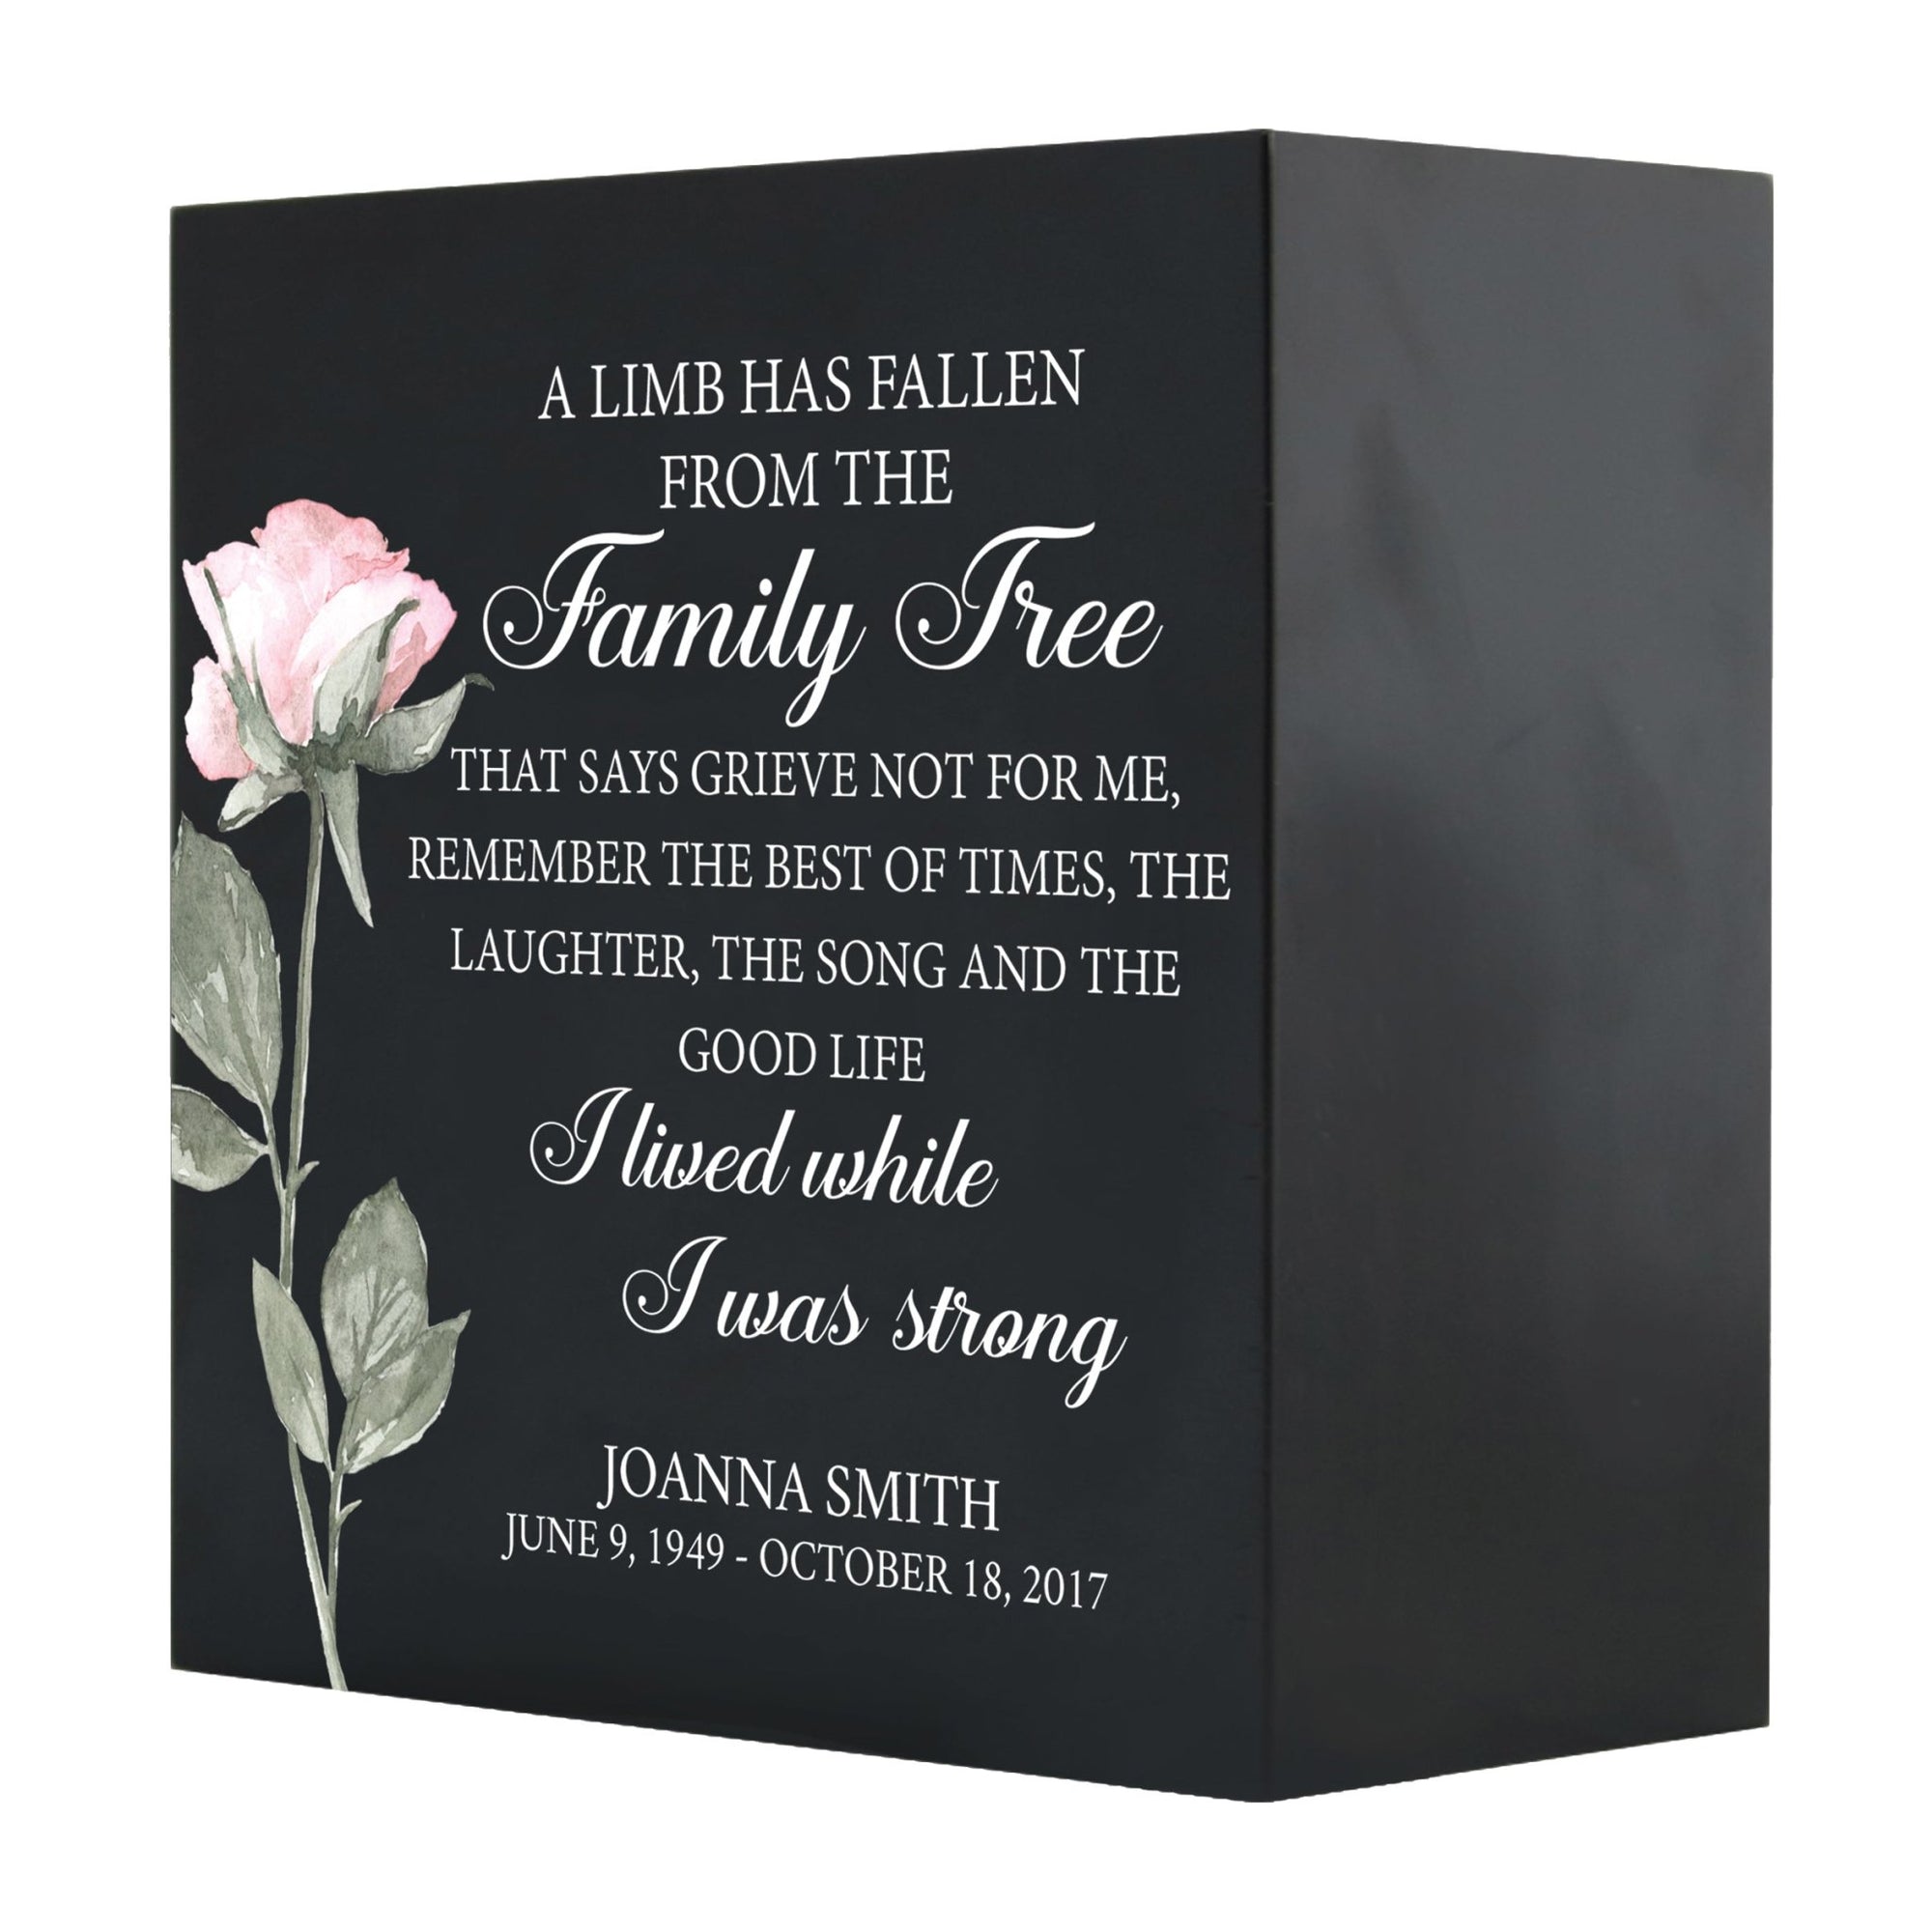 Personalized Modern Inspirational Memorial Wooden Shadow Box and Urn 6x6 holds 53 cu in of Human Ashes - A Limb Has Fallen (Song) - LifeSong Milestones